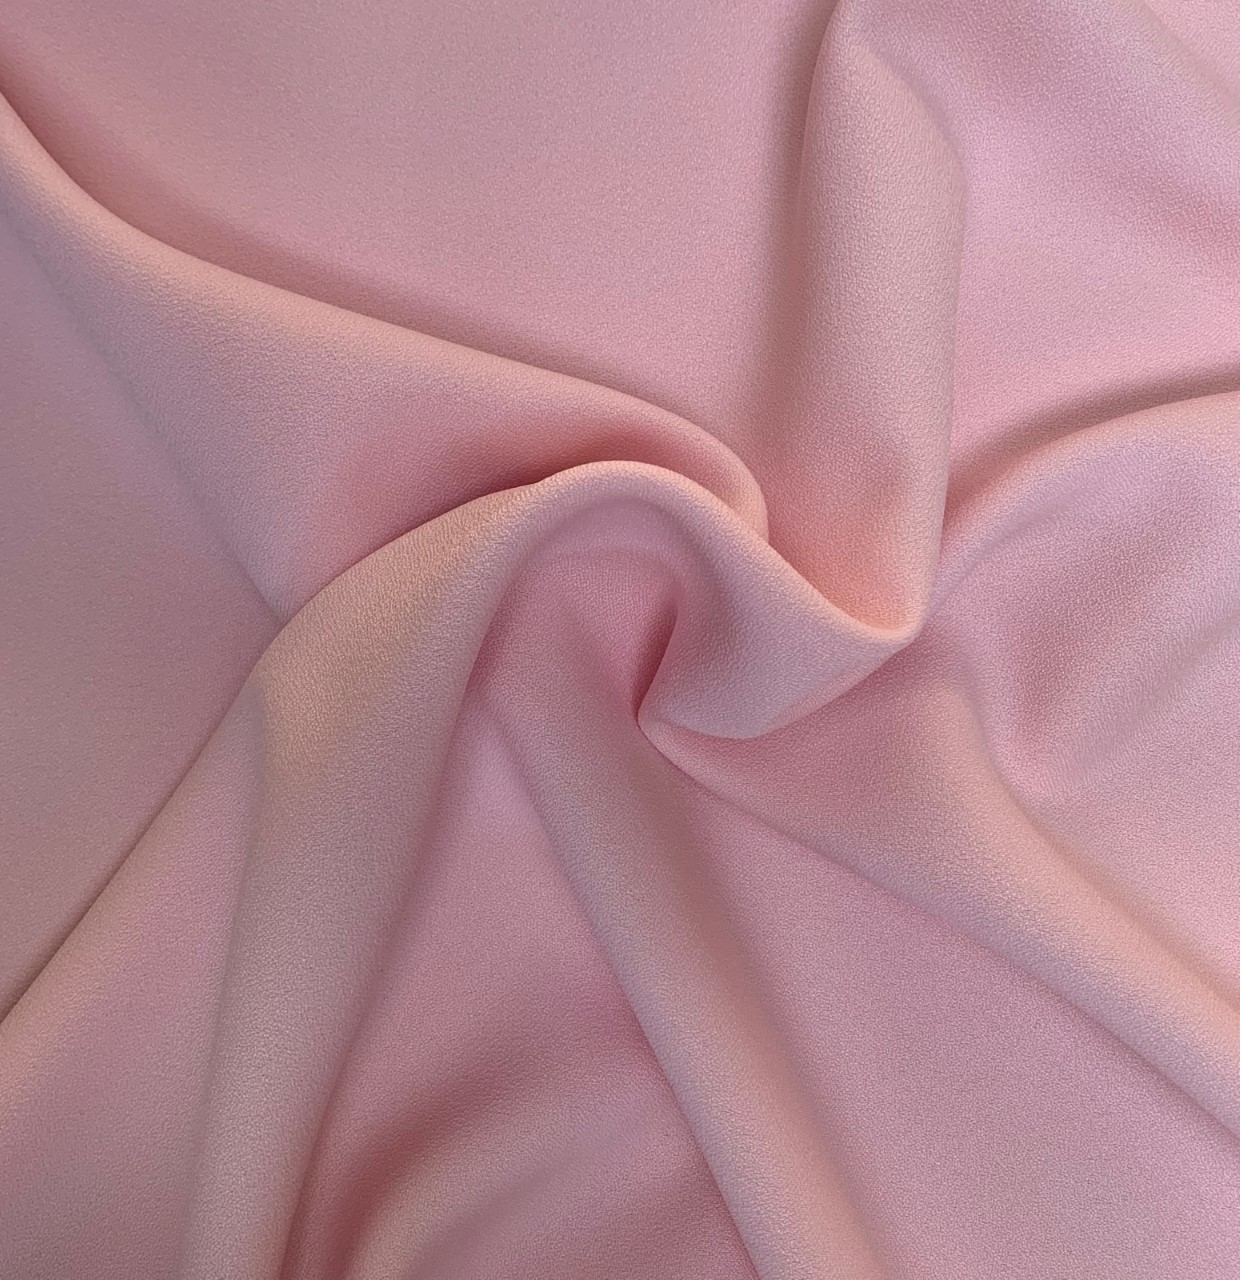 Pink Crepe Fabric - 60" By the yard (100% Polyester)